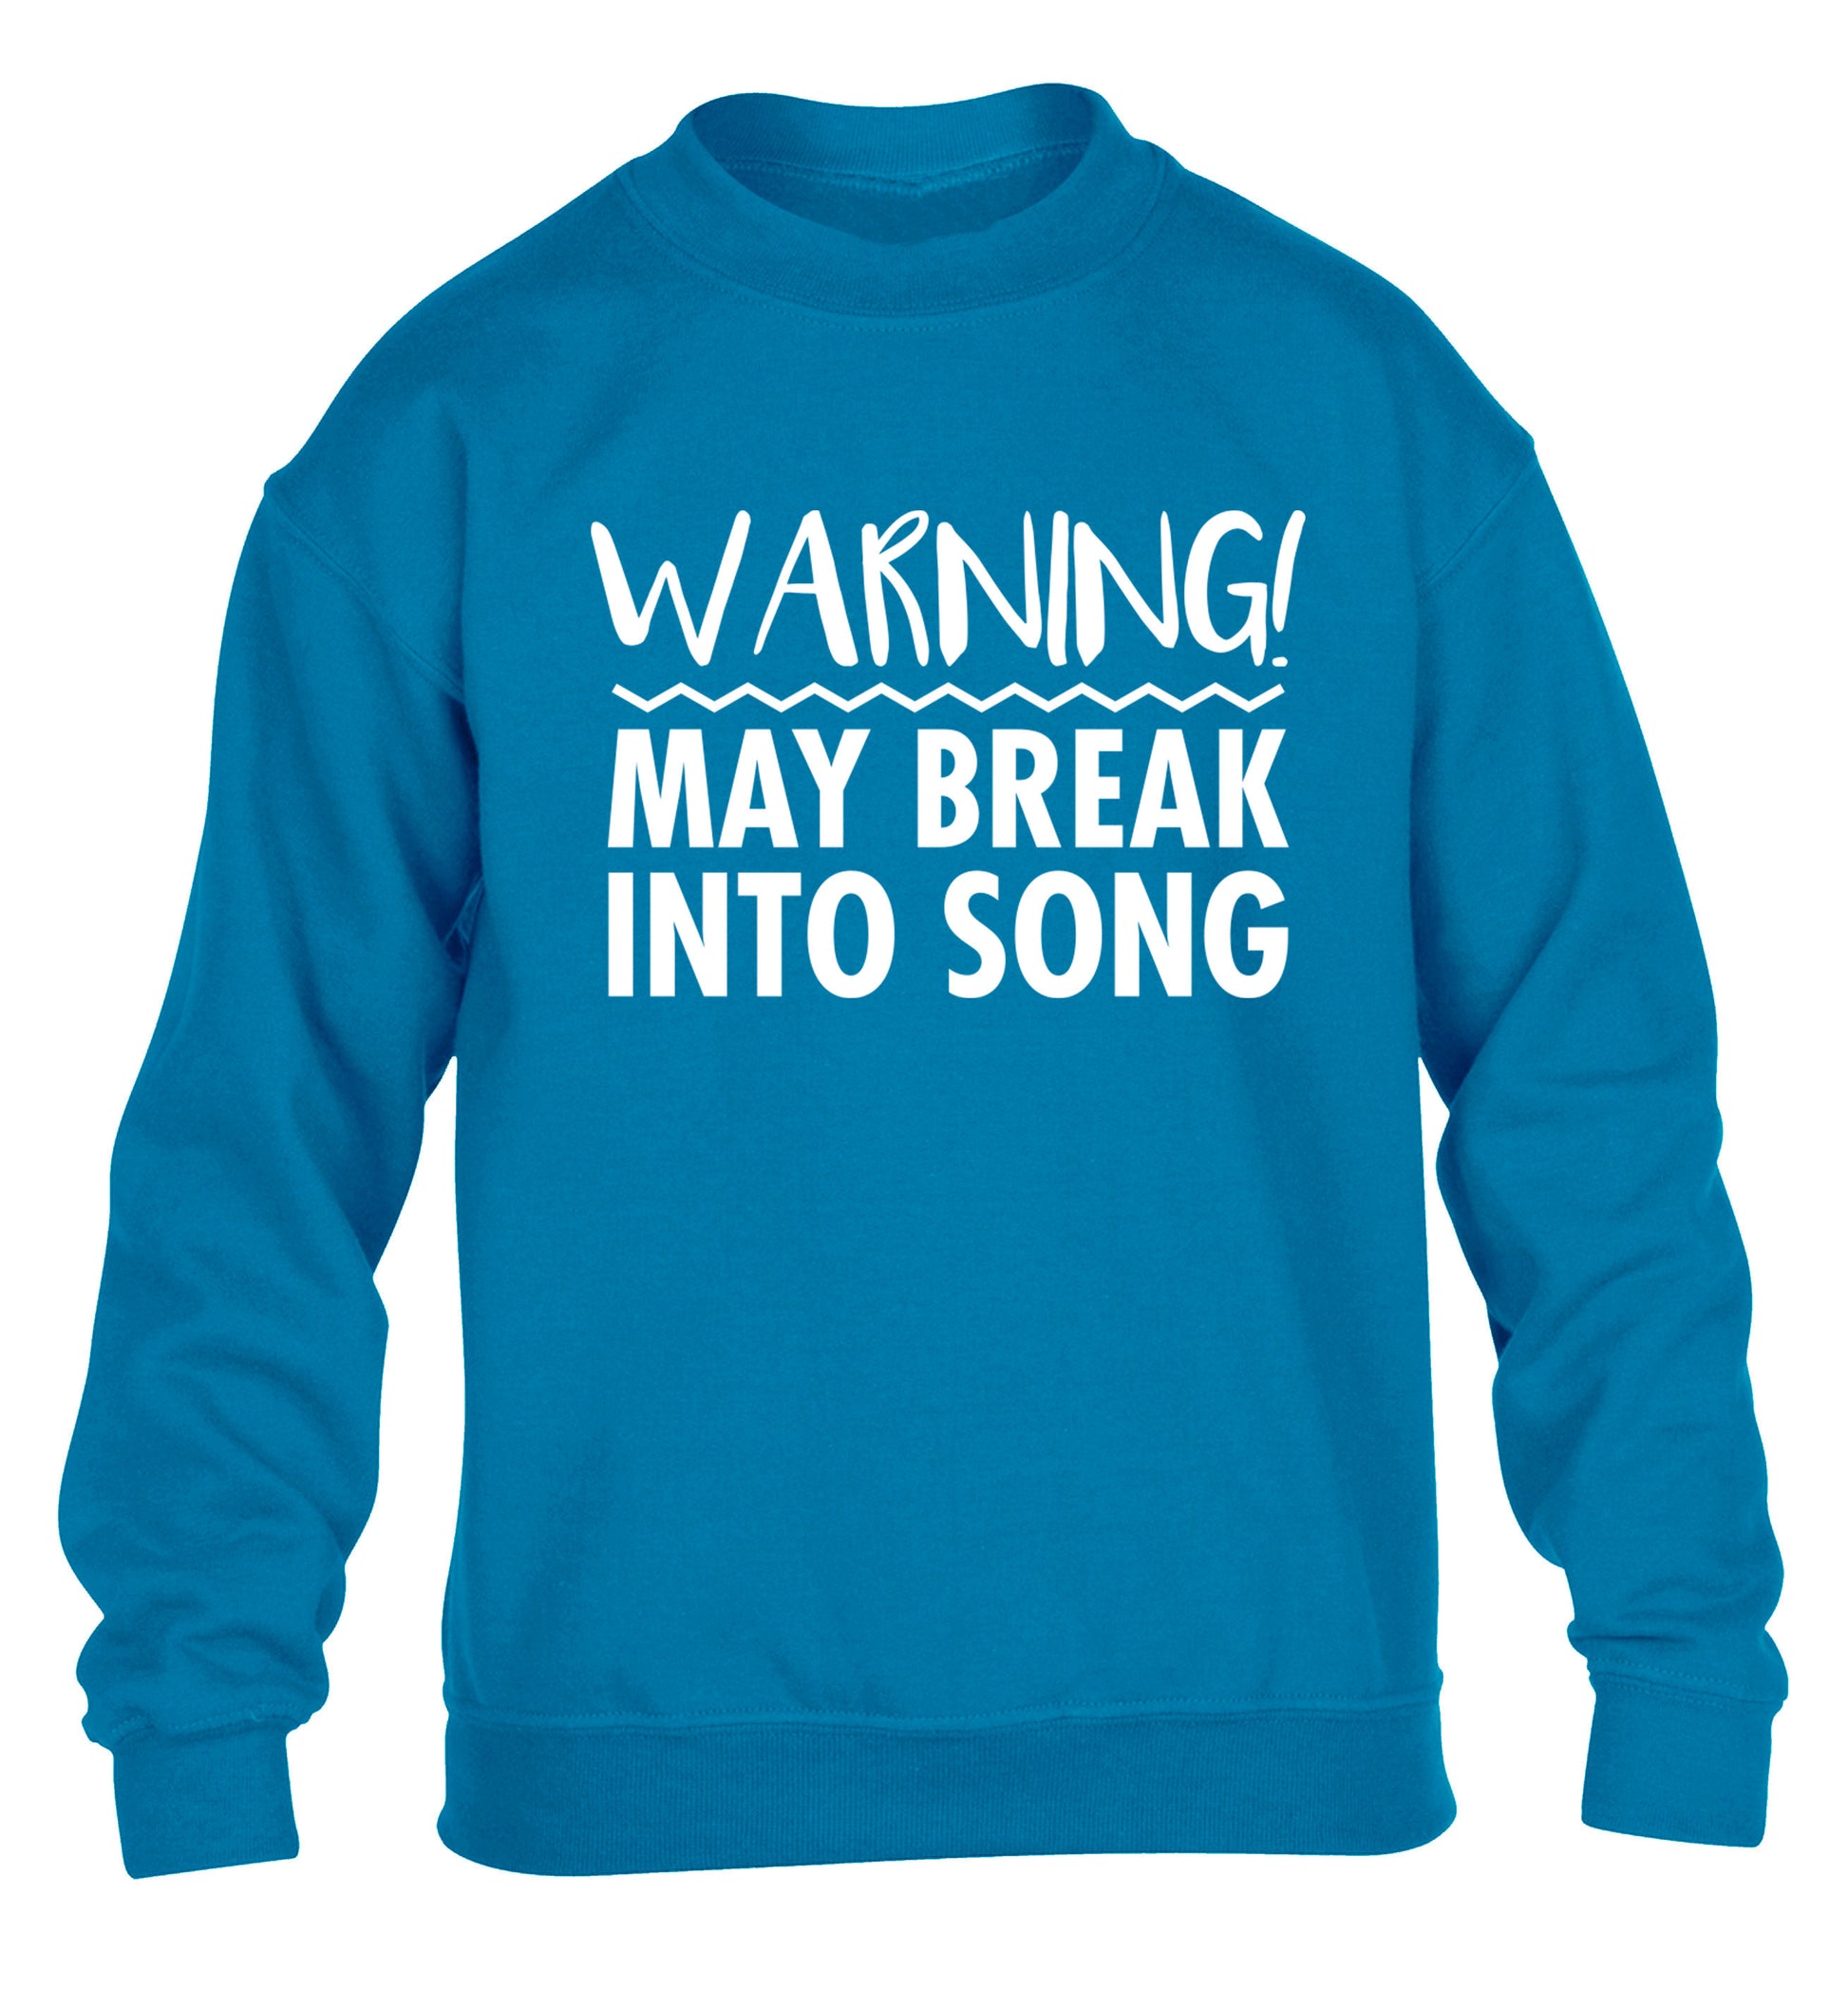 Warning may break into song children's blue sweater 12-14 Years